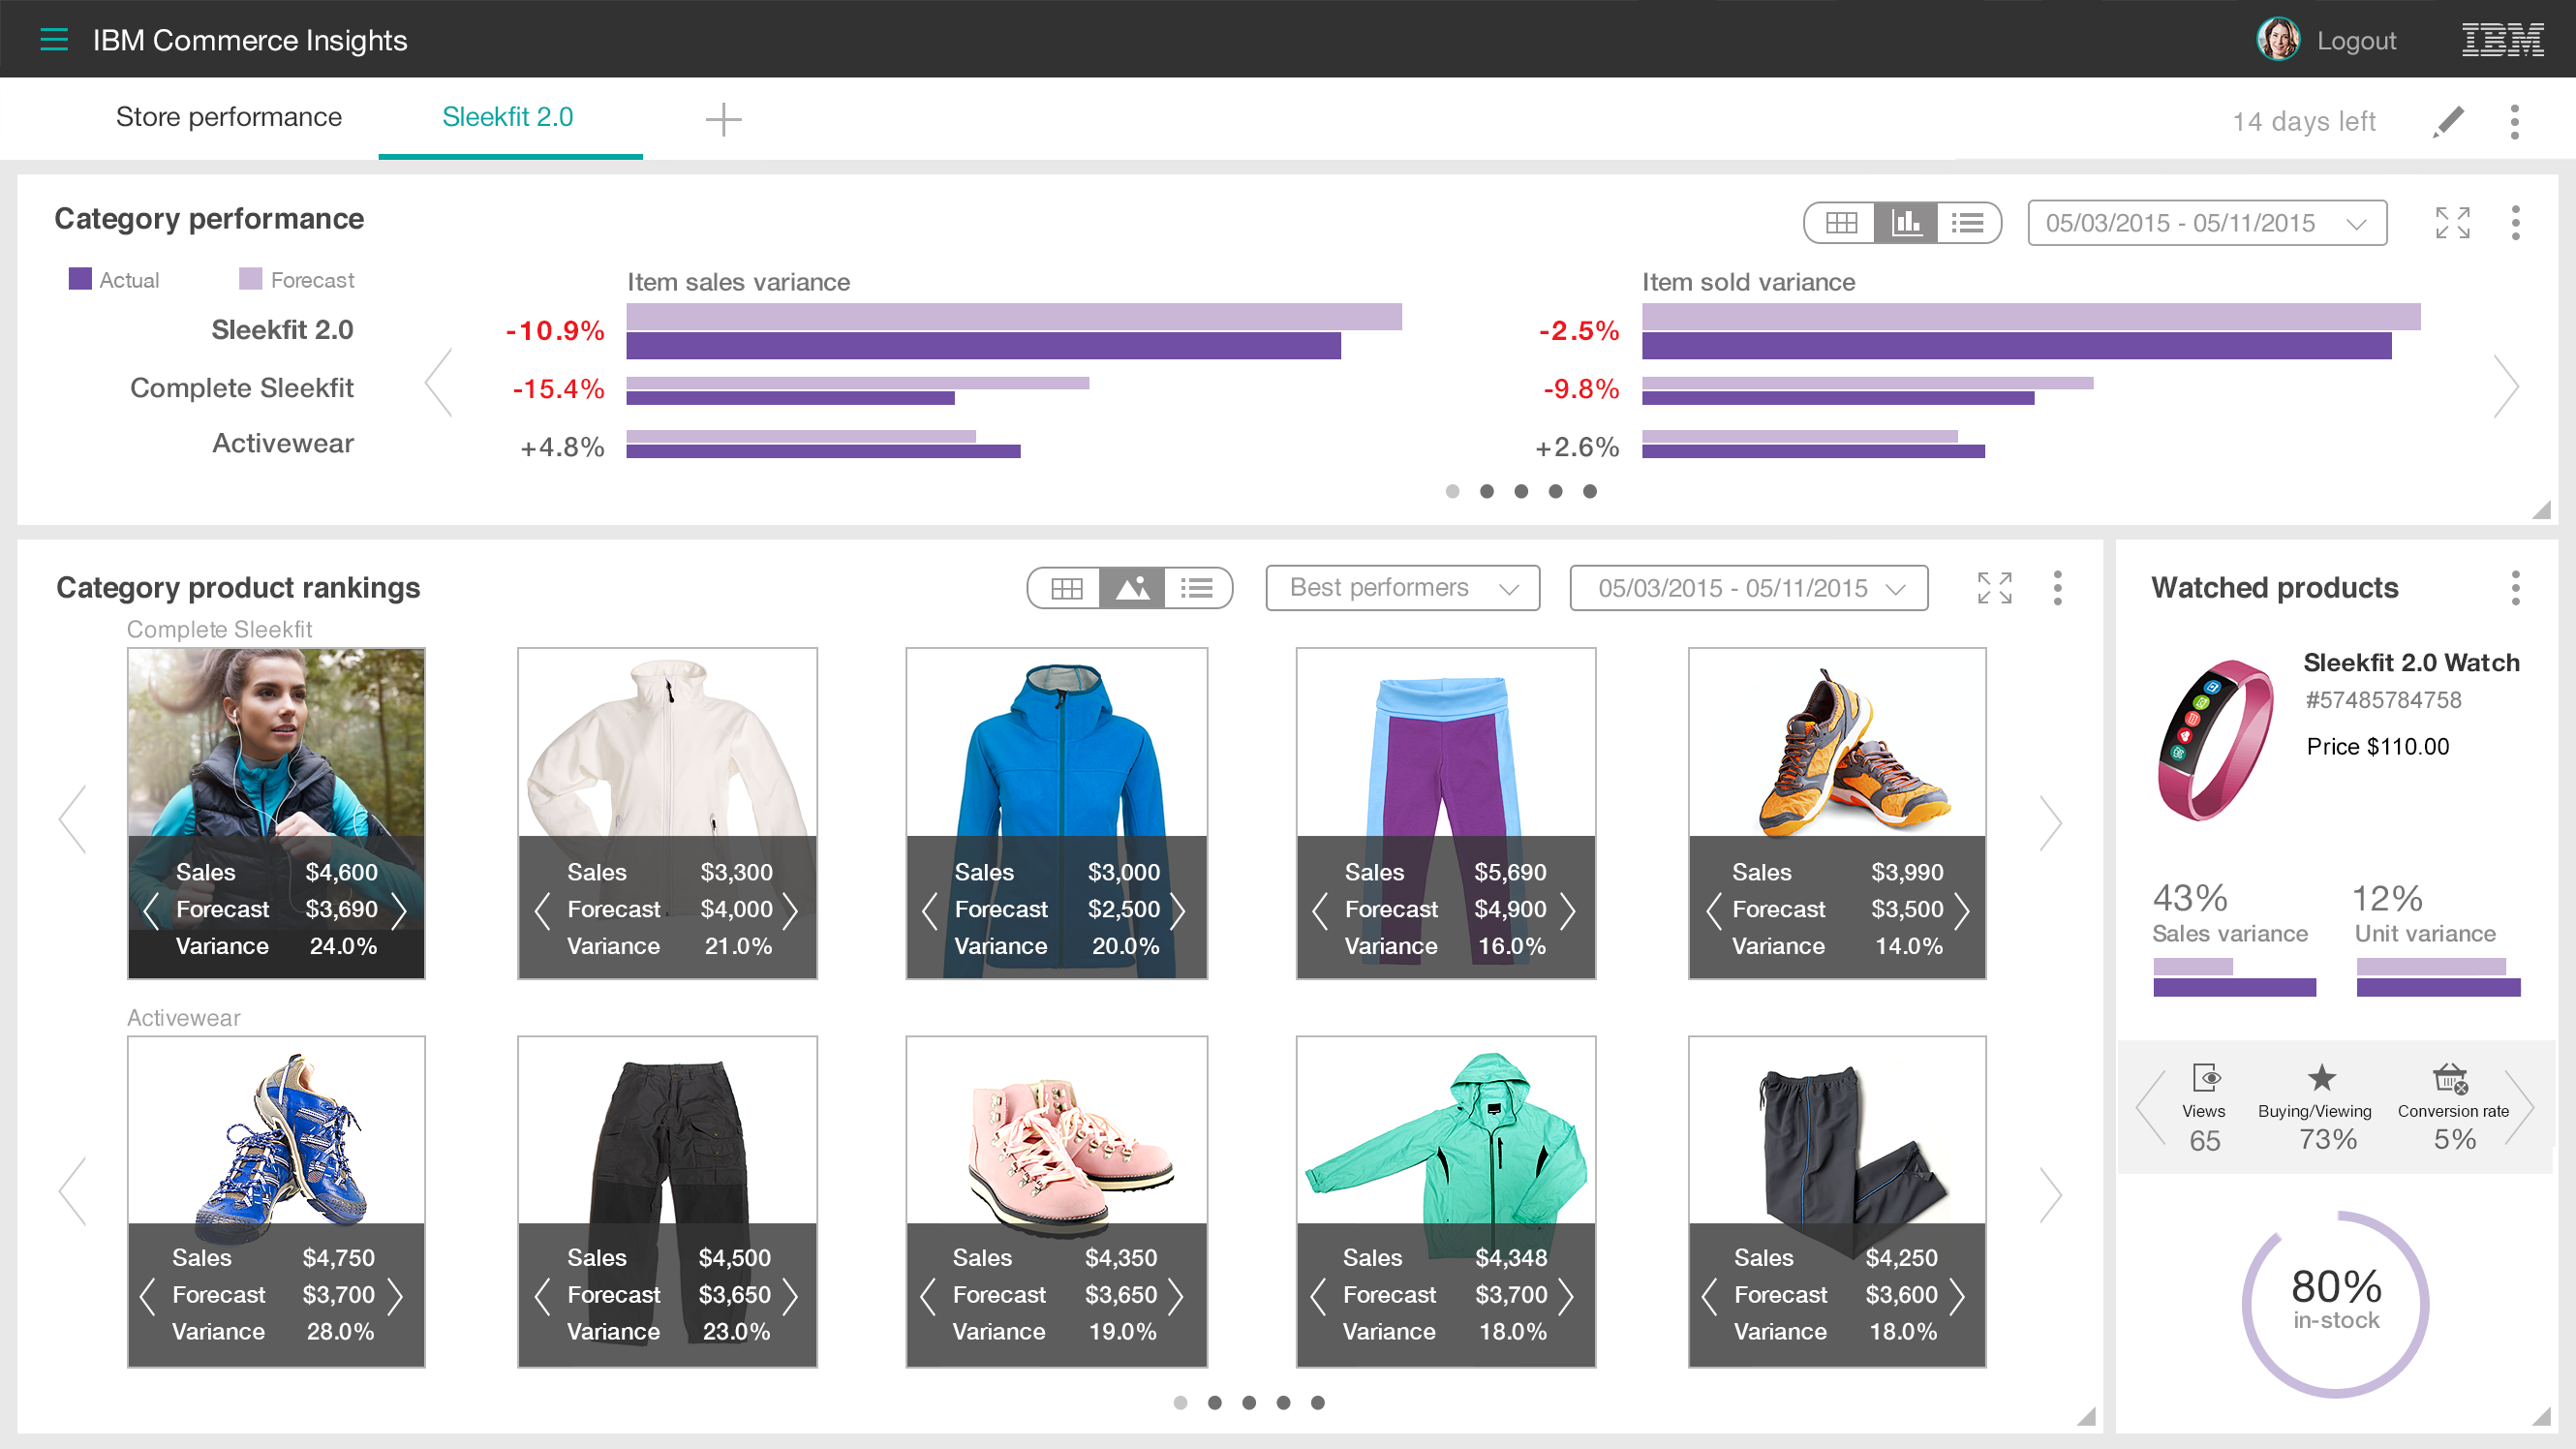 Ibm websphere commerce v8: greater functionality, customer engagement, and insights